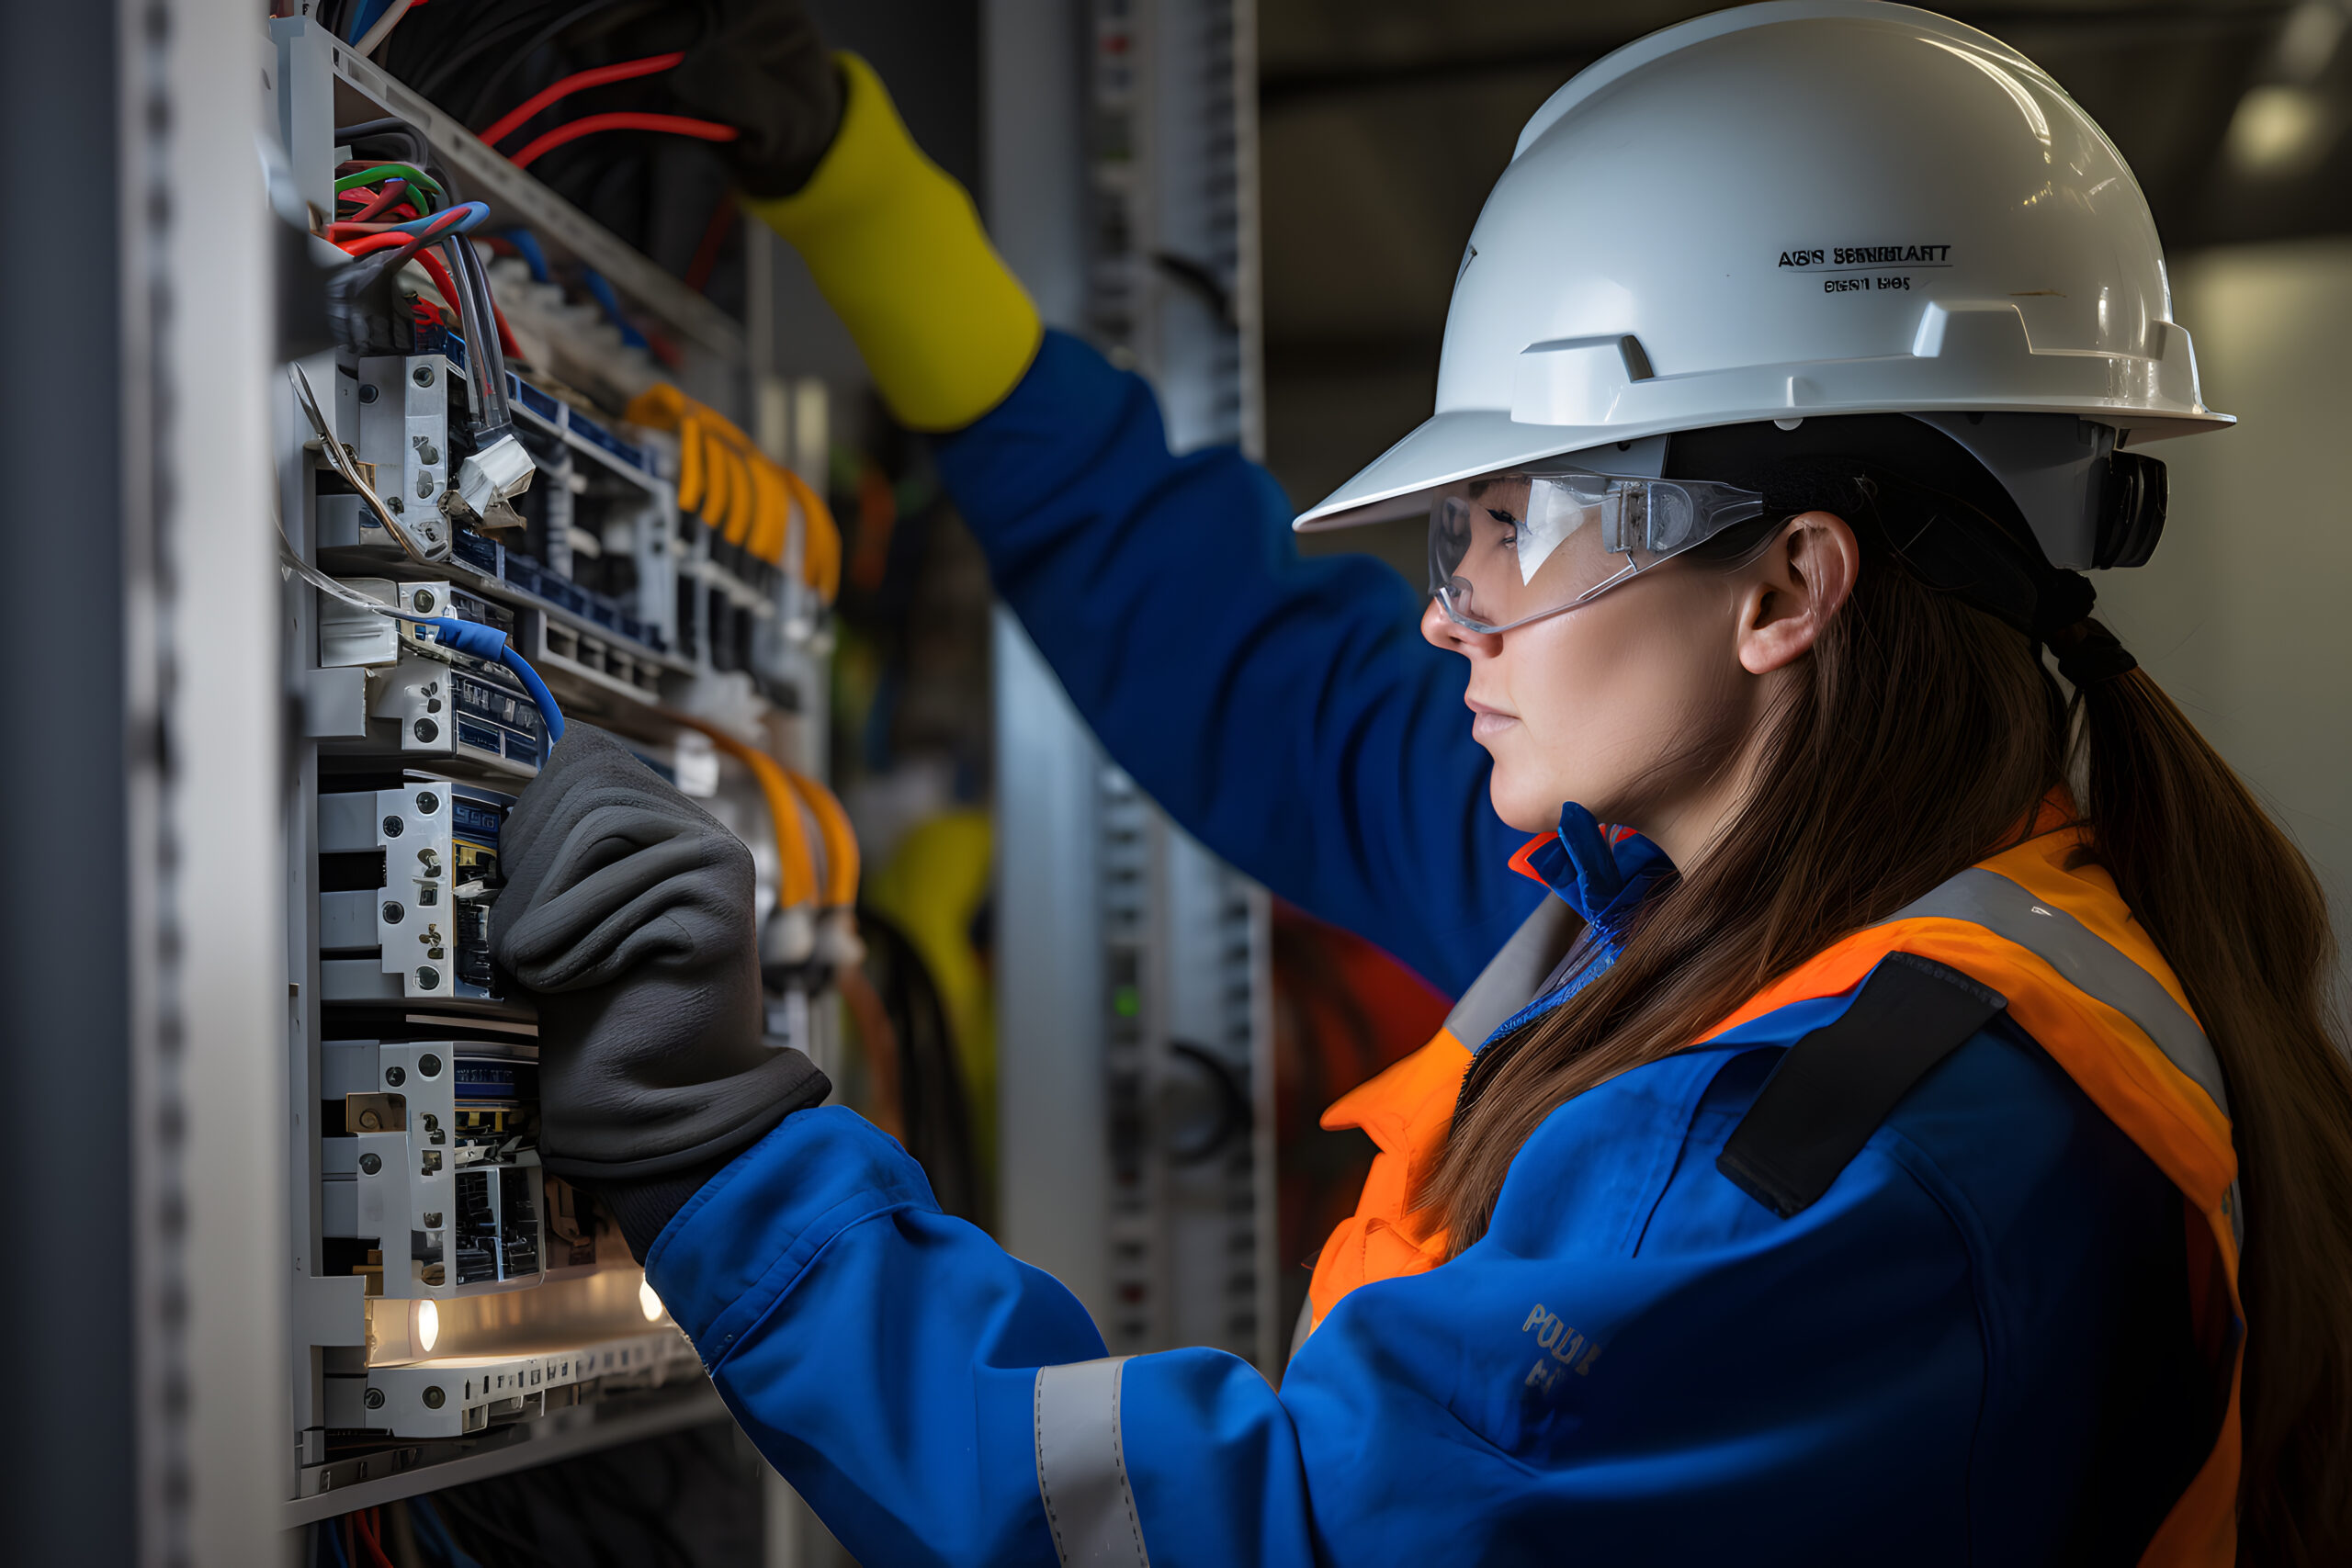 Female commercial electrician at work on a fuse box, adorned in safety gear